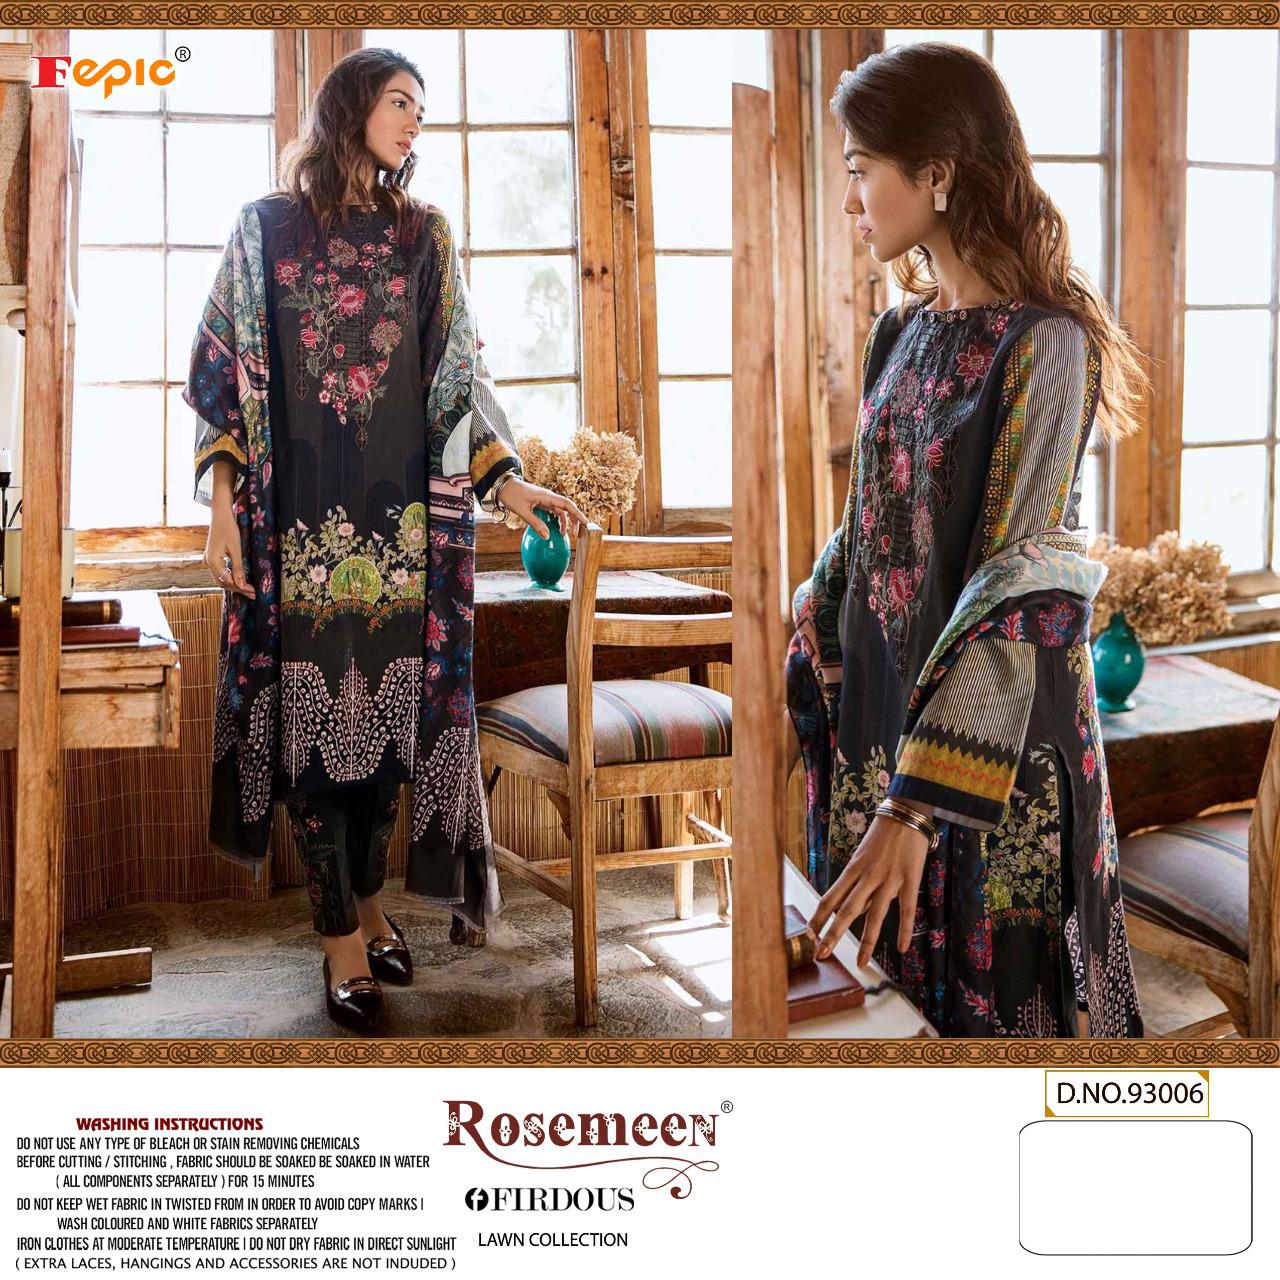 Fepic Rosemeen Firdous Lawn Collection 93006